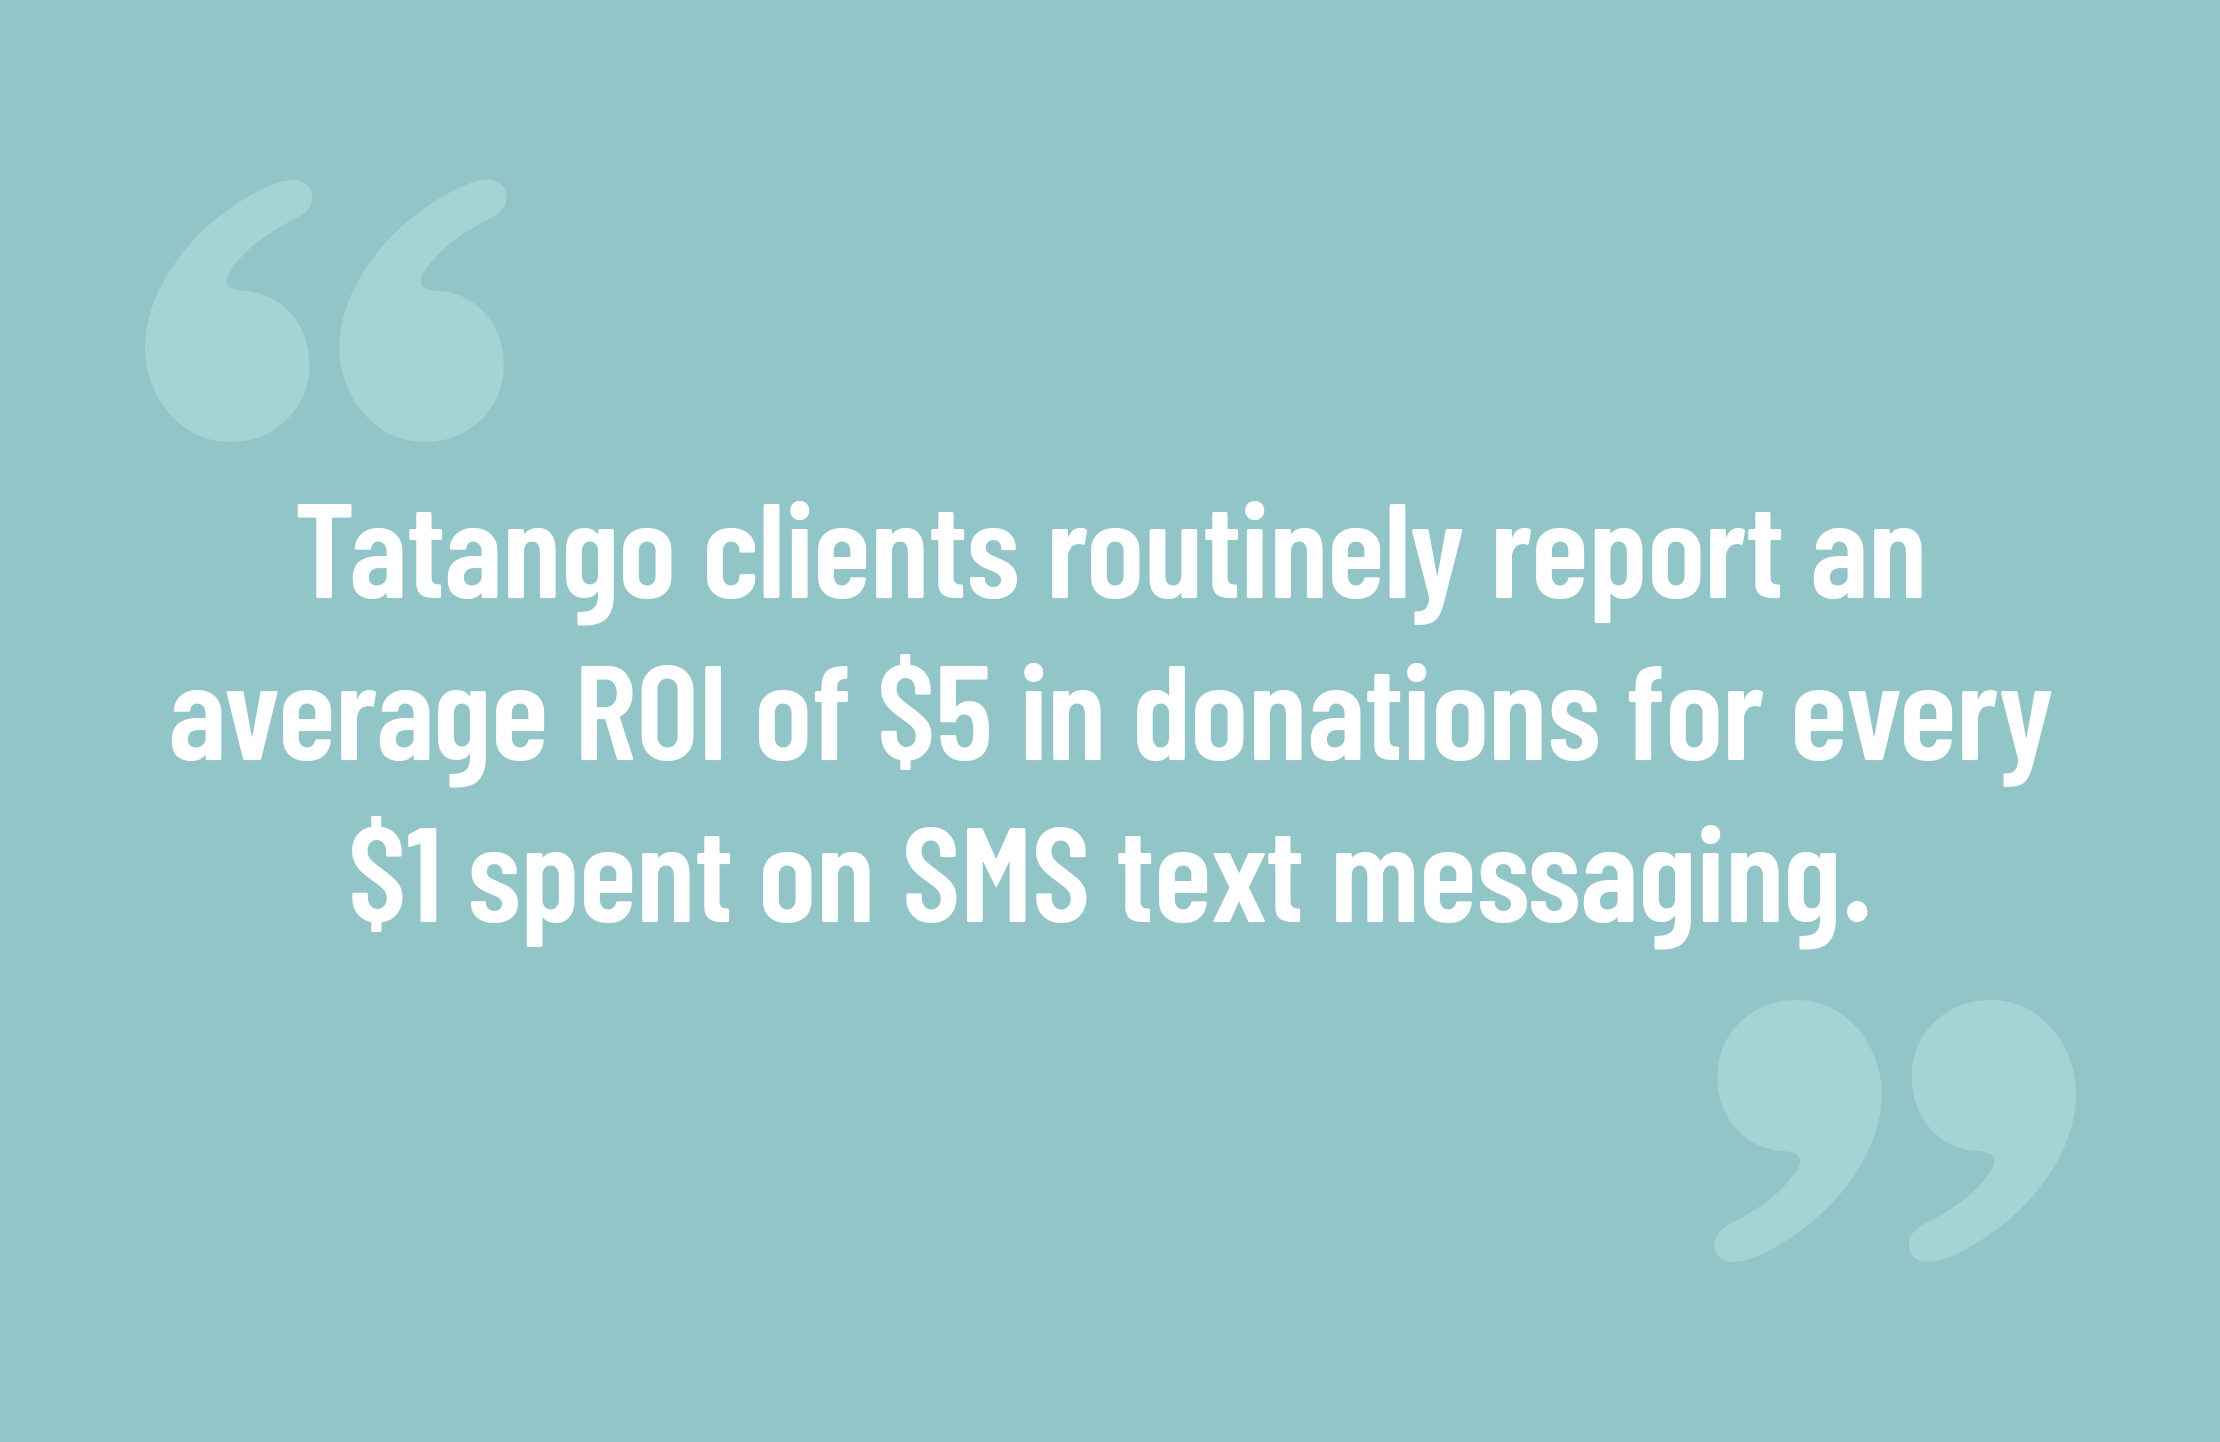 How To Build Your Donor Base For SMS Nonprofit Marketing